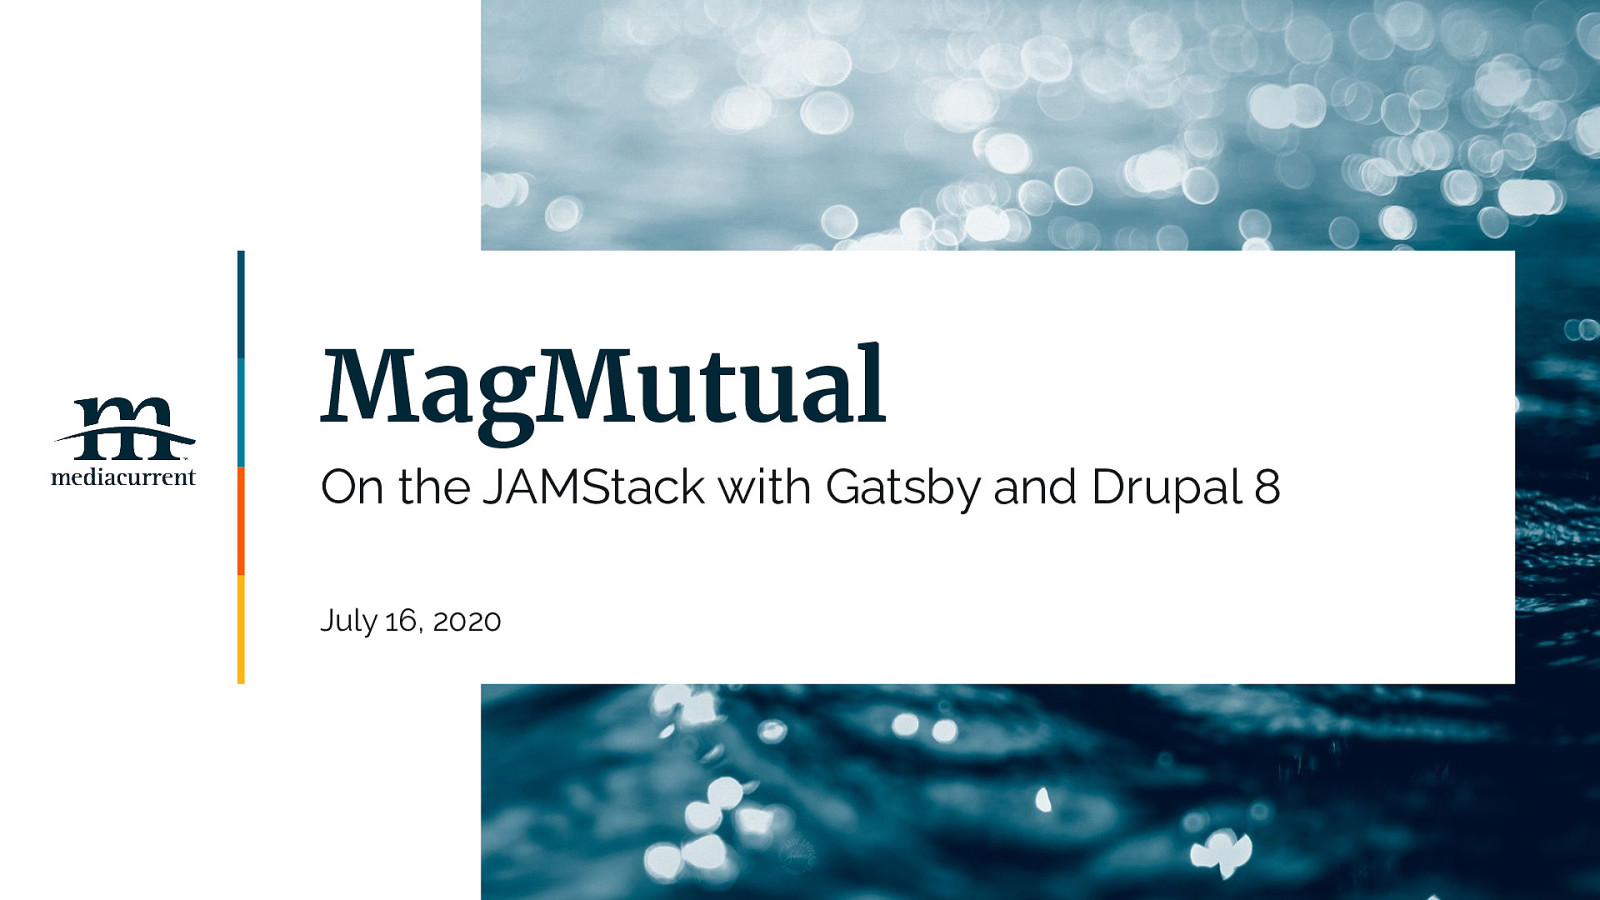 MagMutual.com: On the JAMStack with Gatsby and Drupal 8